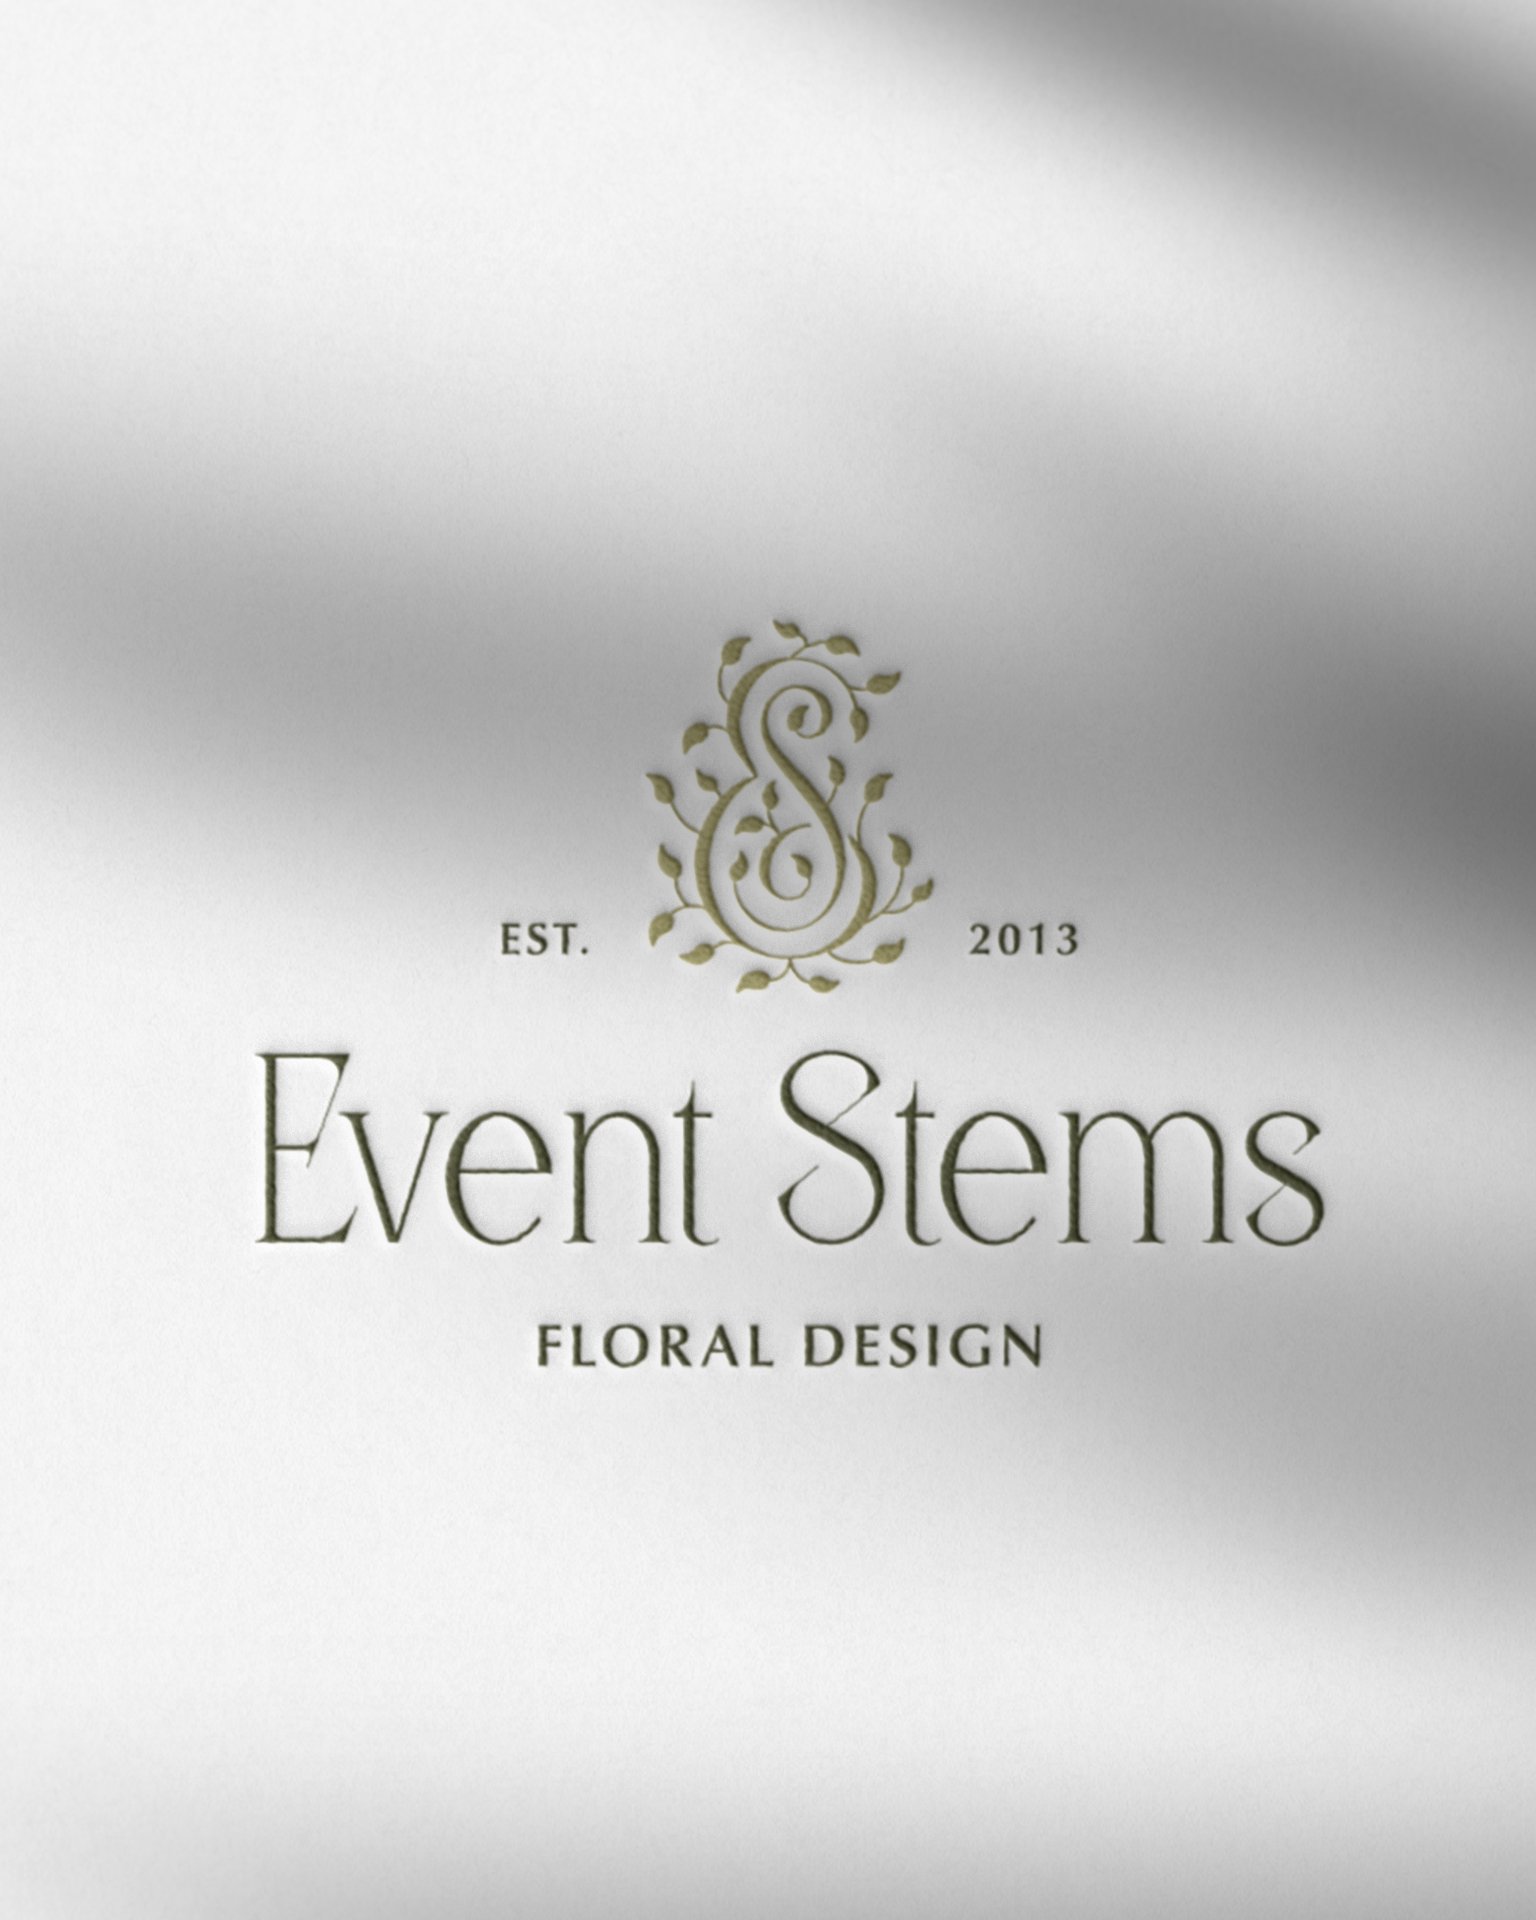 Event Stems logo by Creme with an easy-to-read, yet interesting, type treatment